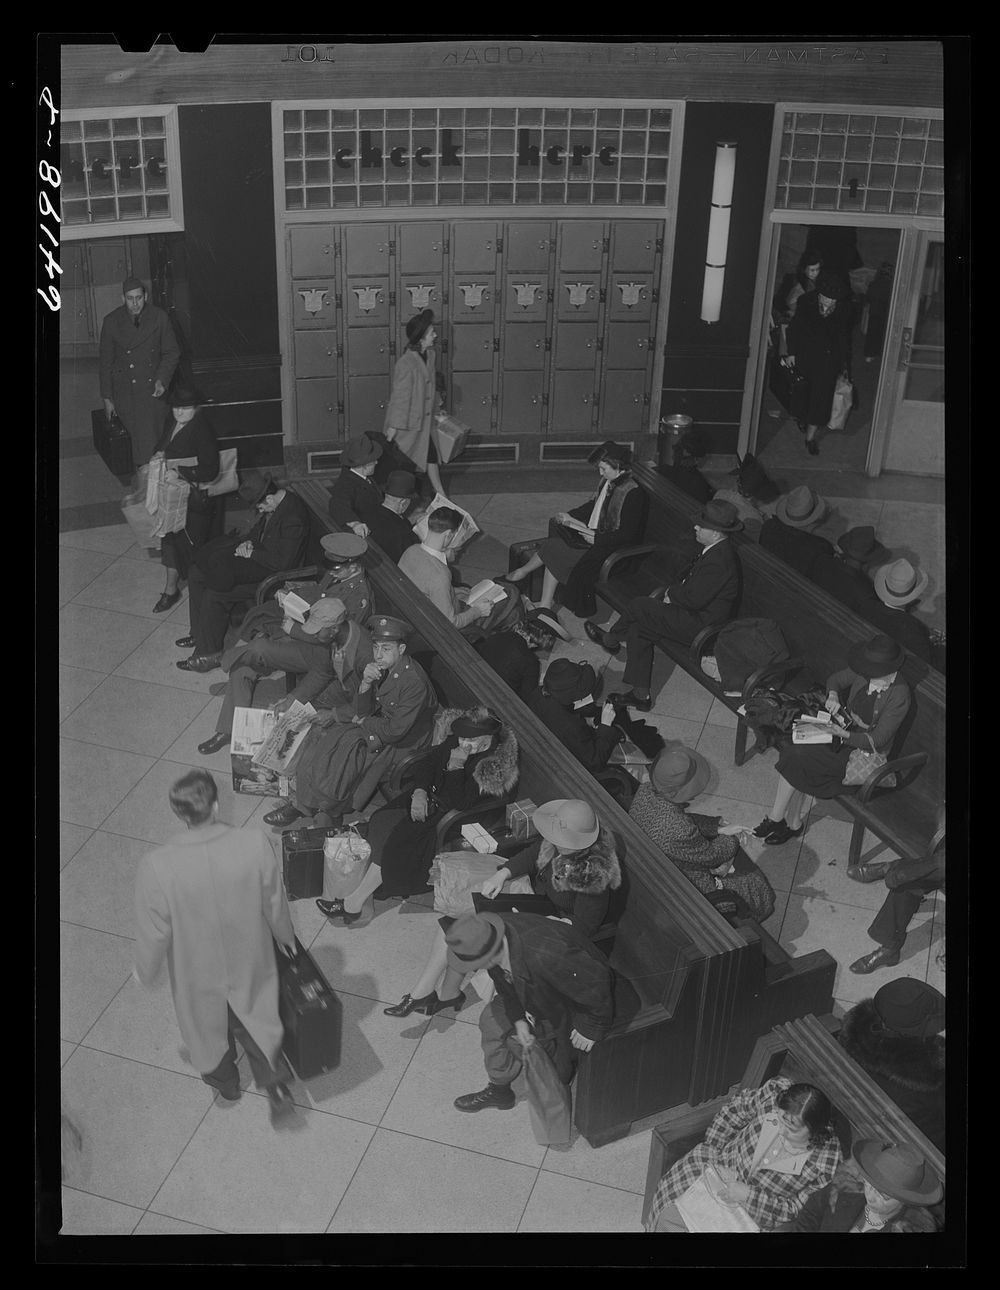 Washington, D.C. Greyhound bus terminal on the day before Christmas. Sourced from the Library of Congress.